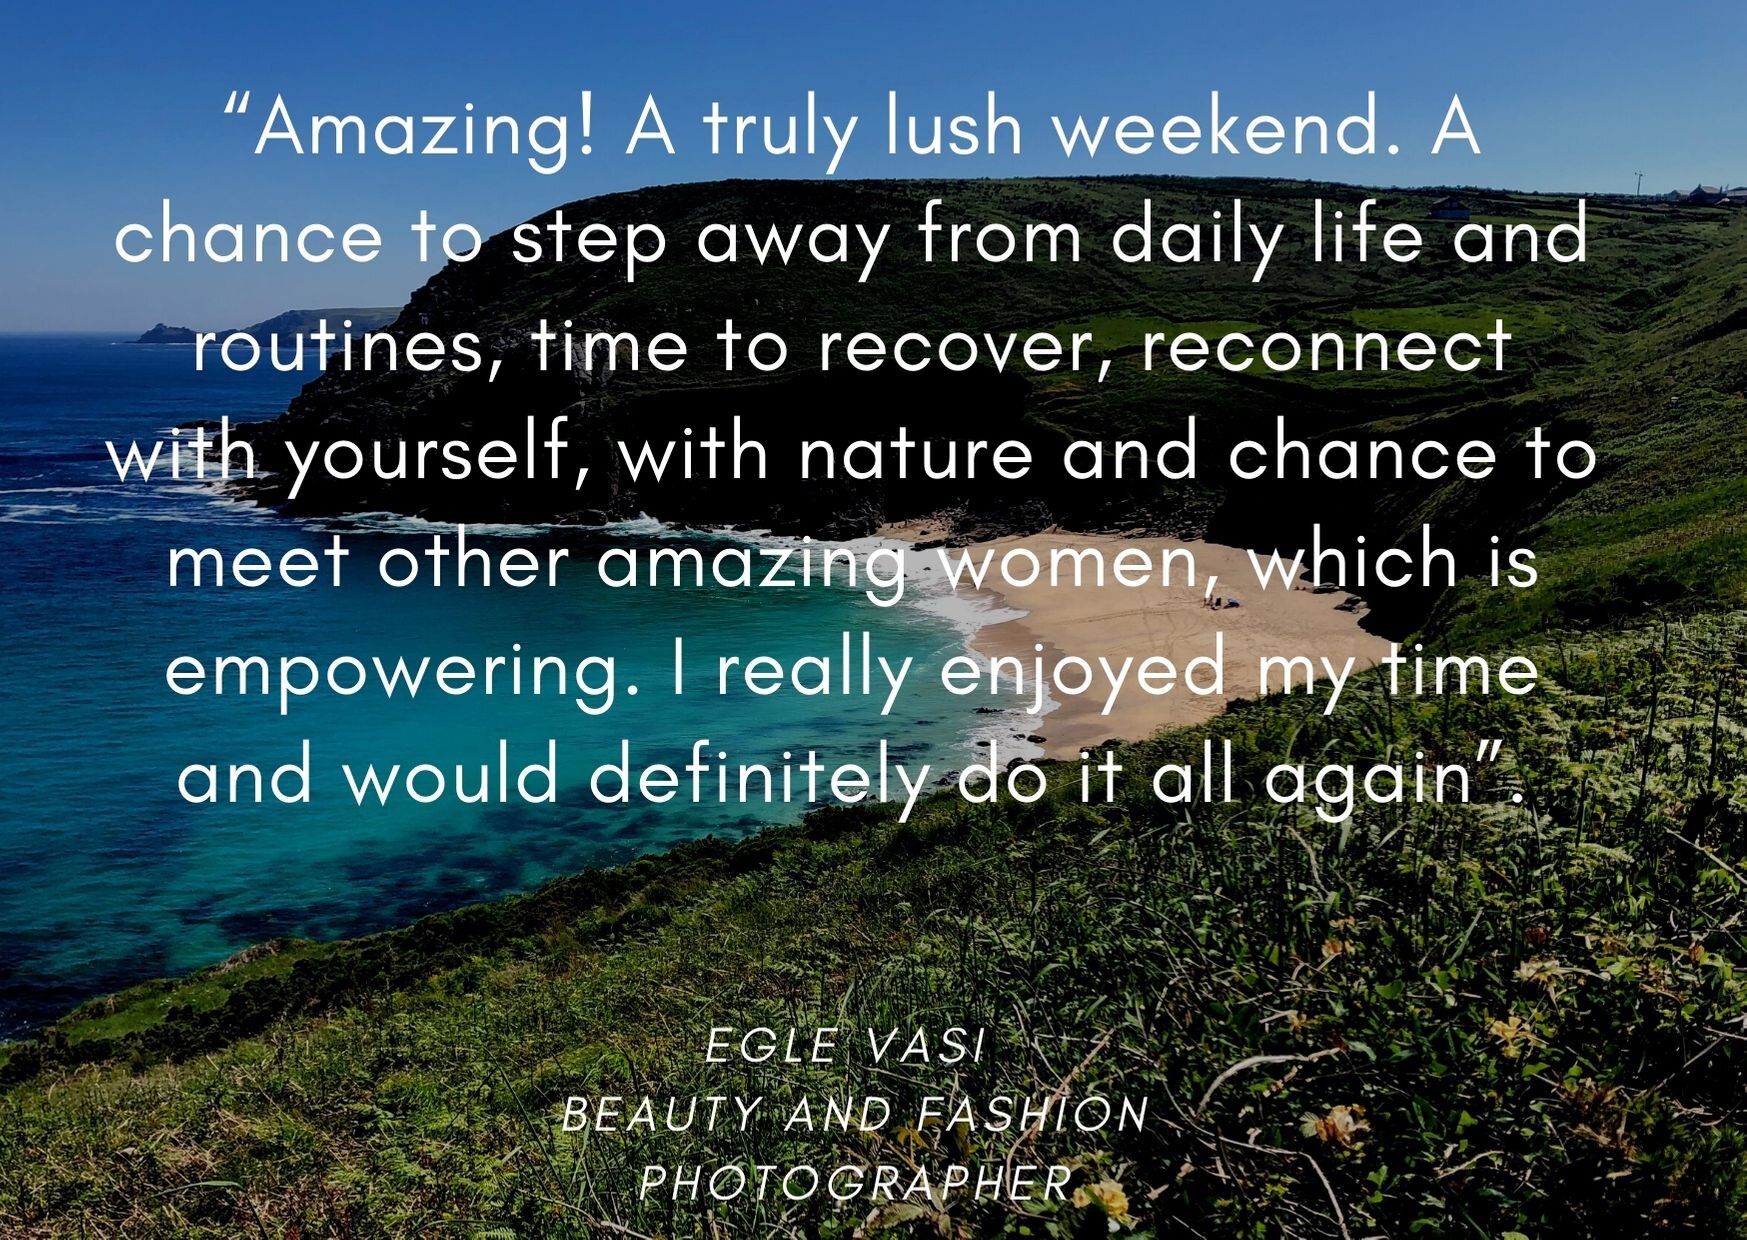 “Amazing! A truly lush weekend. A chance to step away from daily life and routines, time to recover, reconnect with yourself, with nature and chance to meet other amazing women, which is empowering. I really enjoyed .jpg